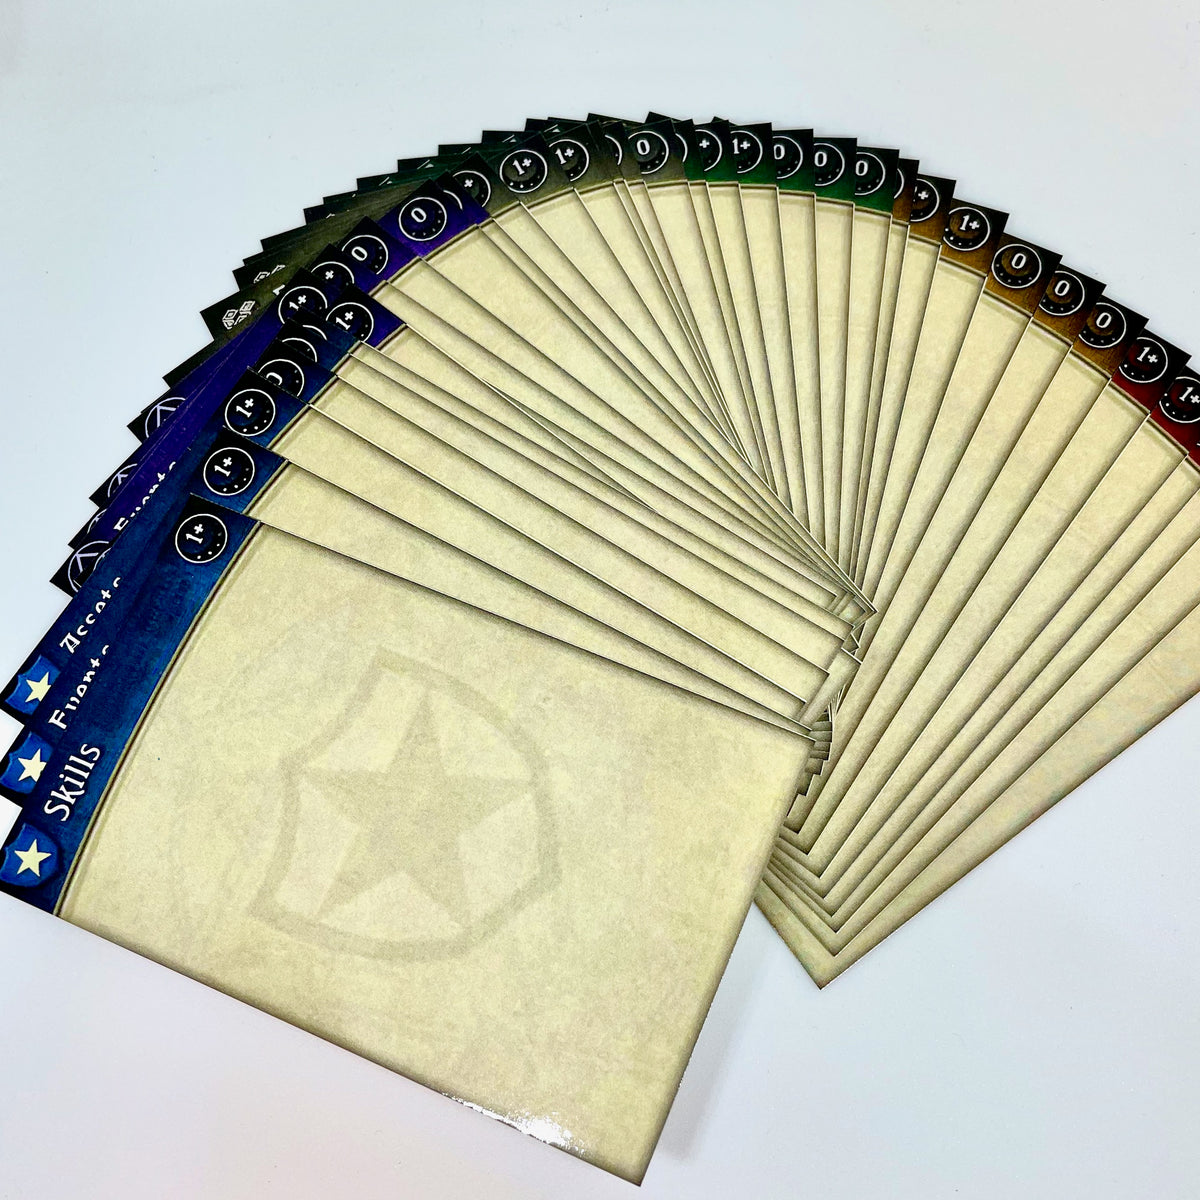 Assets, Events, Skills Expansion Dividers - Arkham Horror LCG Deck Box Dividers